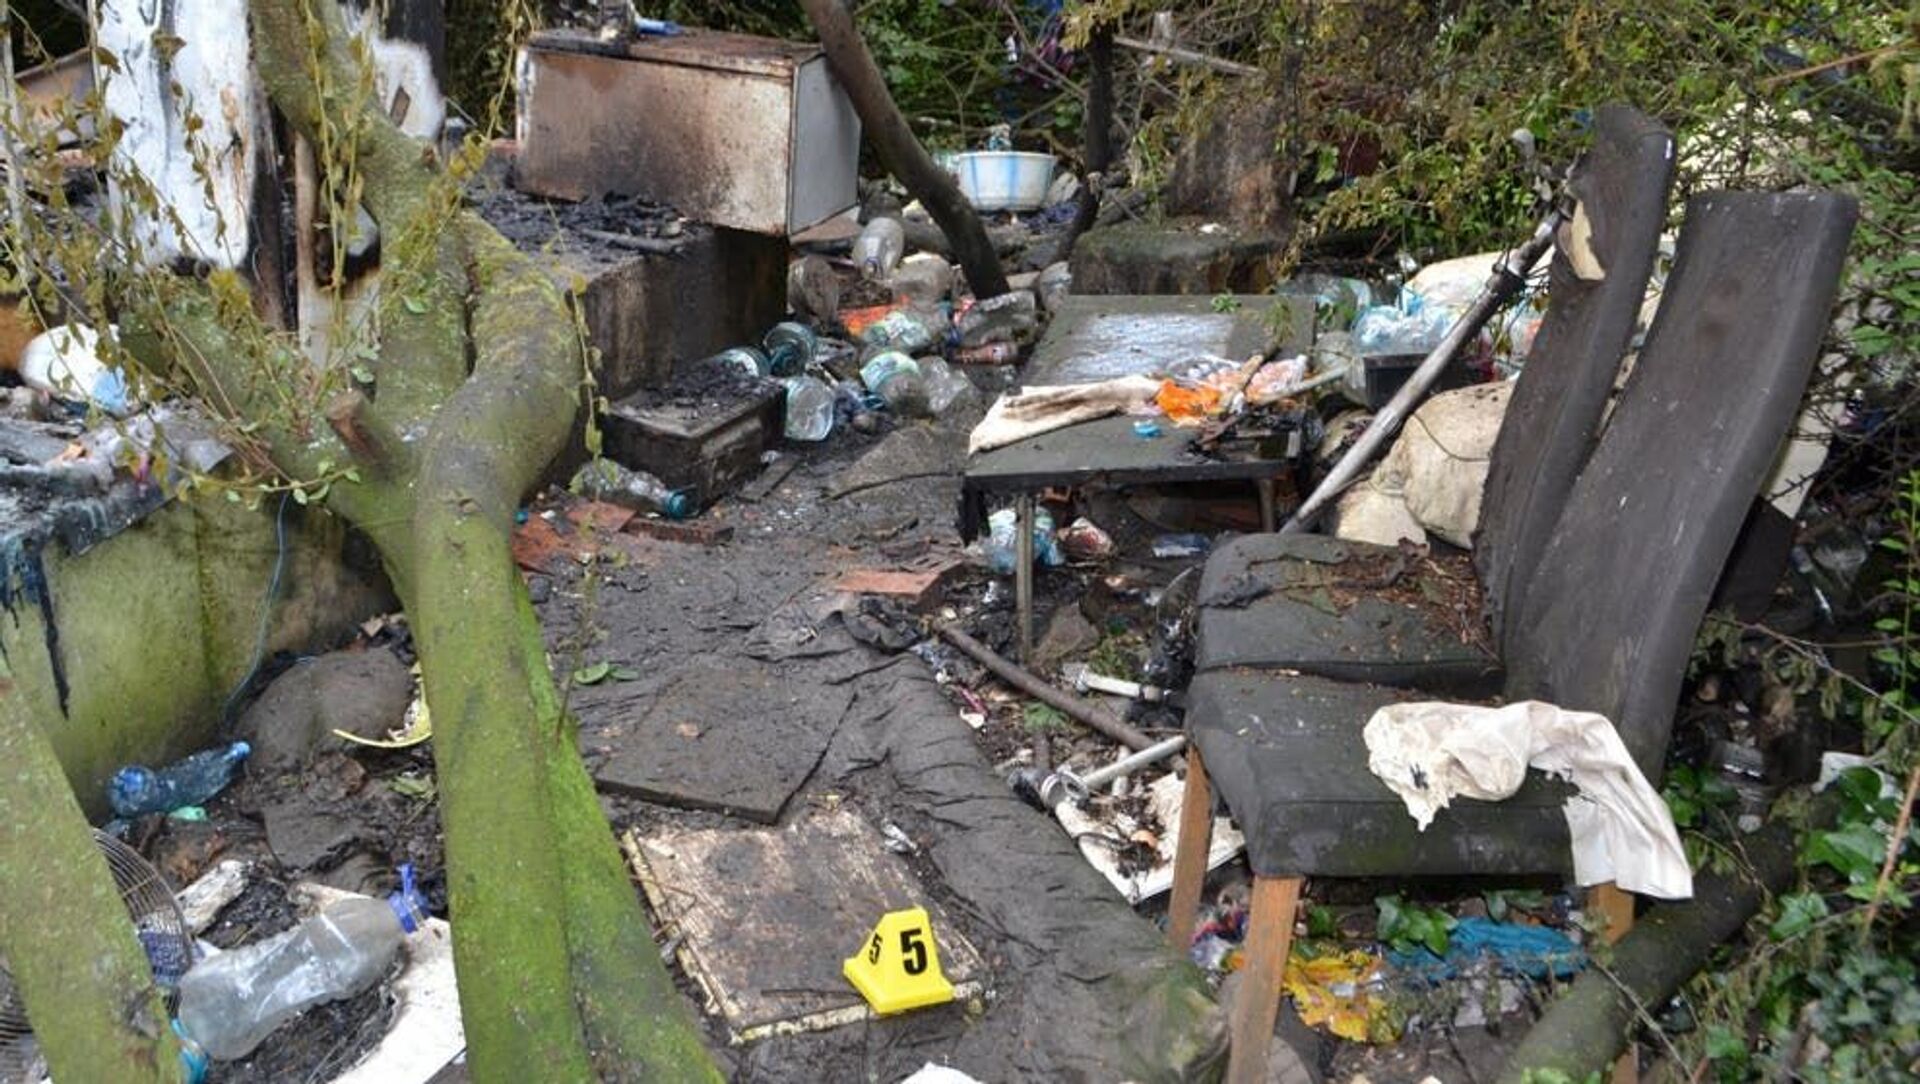 The remains of a hut in Ilford, east London which was set on fire killing Ionut Manea in June 2019 - Sputnik International, 1920, 09.07.2021